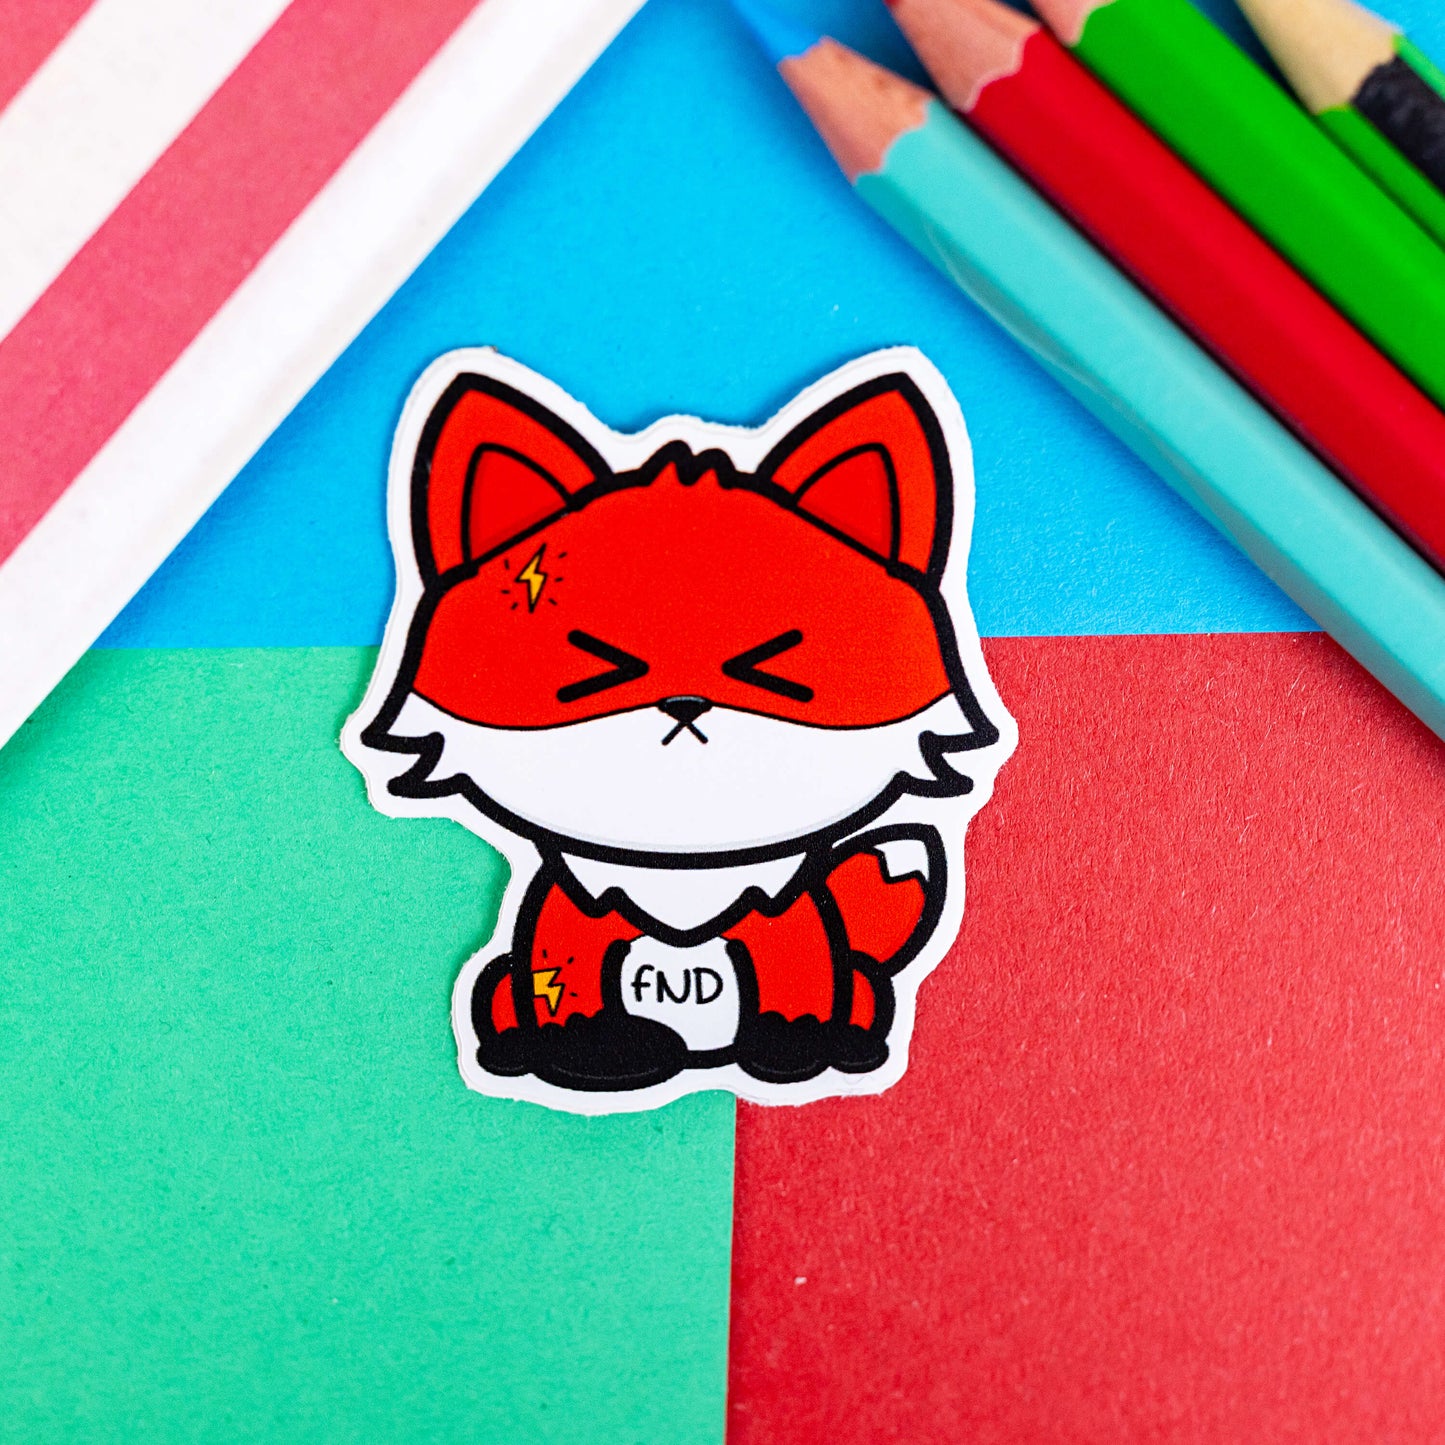 A red fox sticker looking very cute but in pain with the text FND on its stomach. It is on a red, blue and green background with coloured pencils to one side and a red stripy paper bag. The hand drawn design is raising awareness for Functional Neurological Disorder FND.